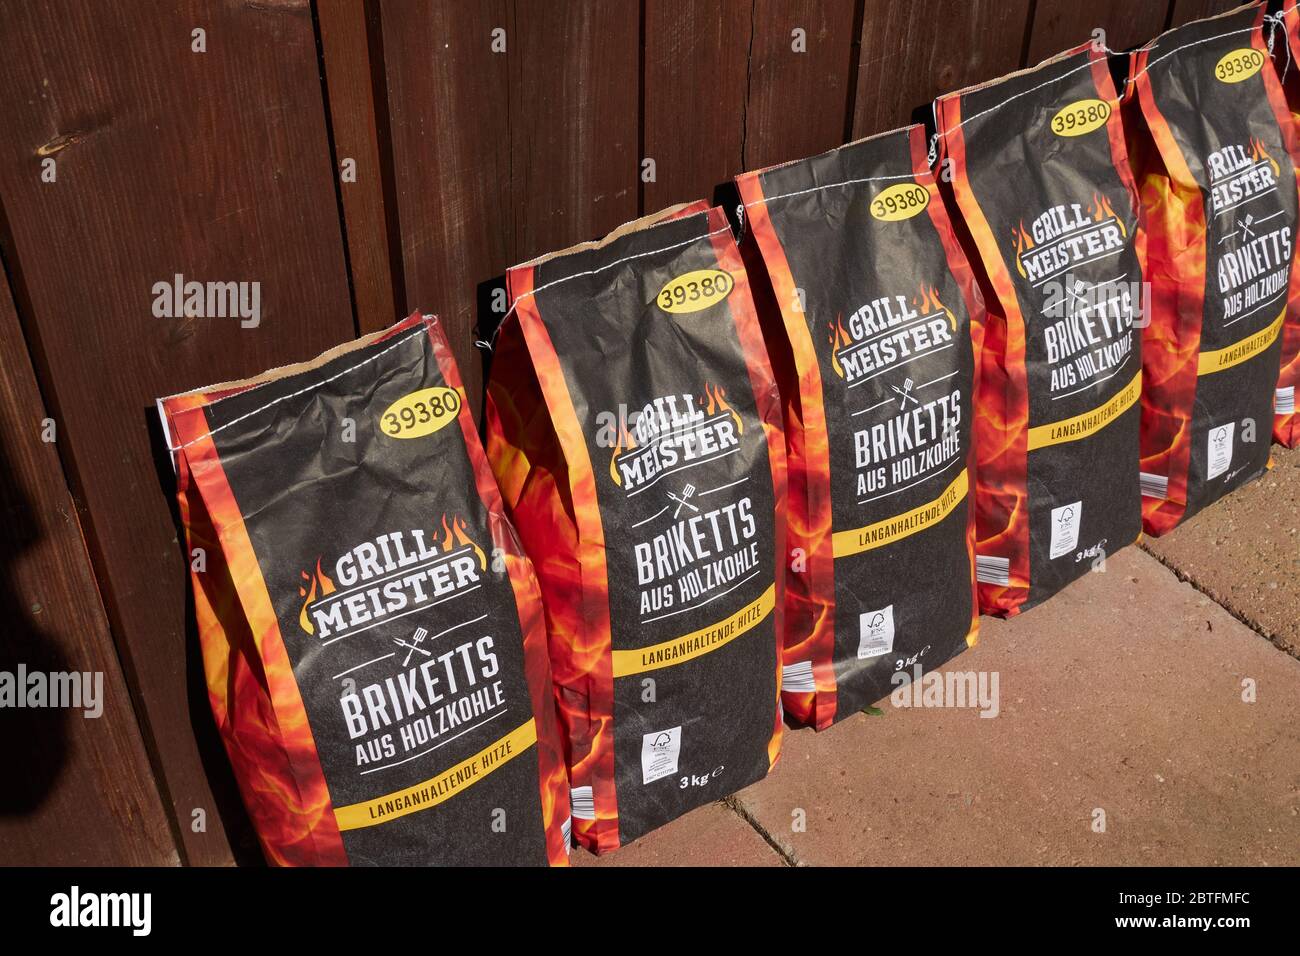 Nuertingen, Germany - May 19, 2020: Grill Meister briquettes made of  charcoal, house brand of the company Lidl, sacks on a floor made of stone  plates Stock Photo - Alamy